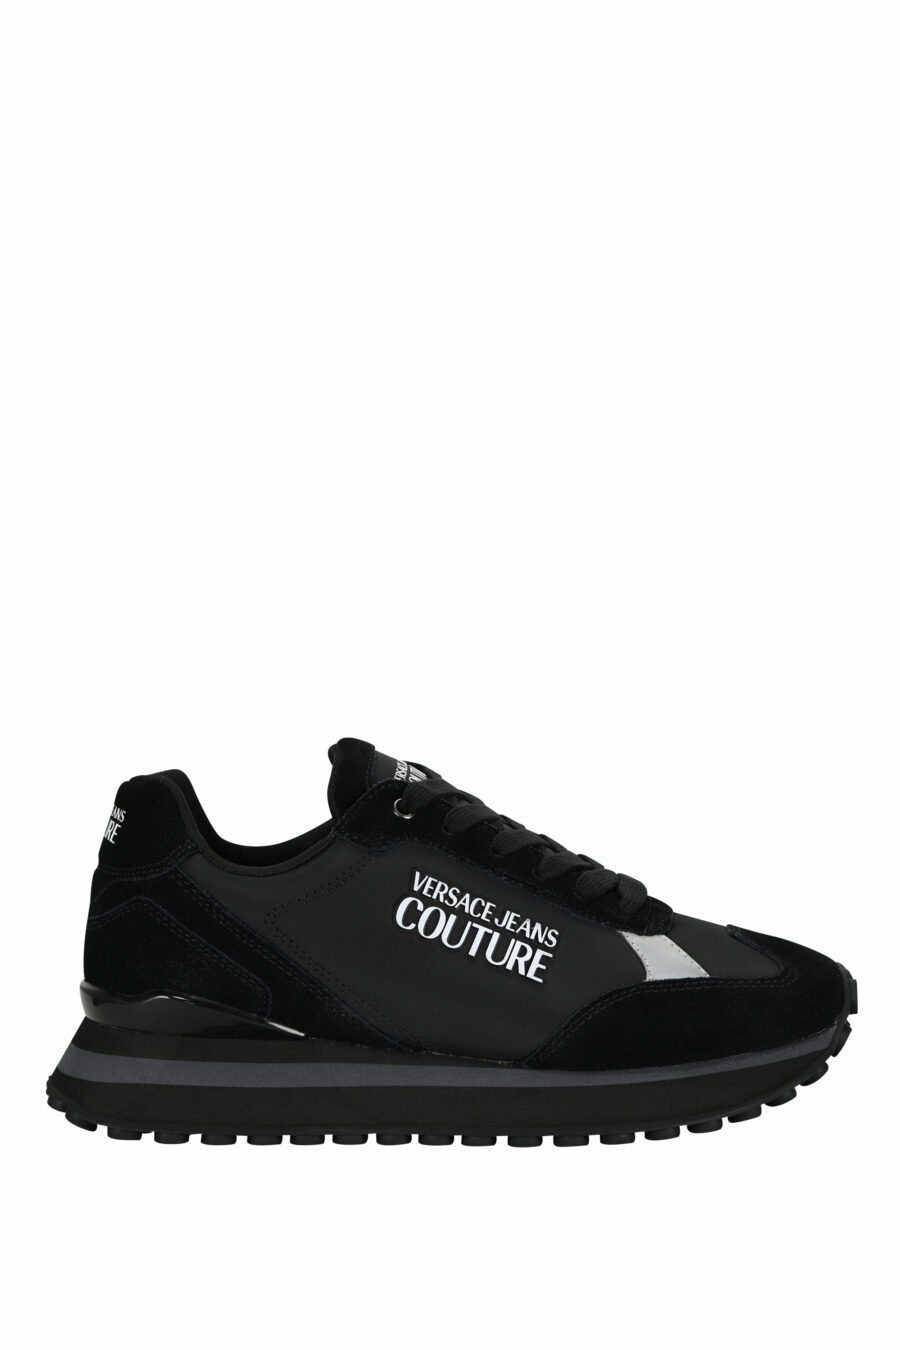 Black mix trainers with white mini-logo and black sole - 8052019606362